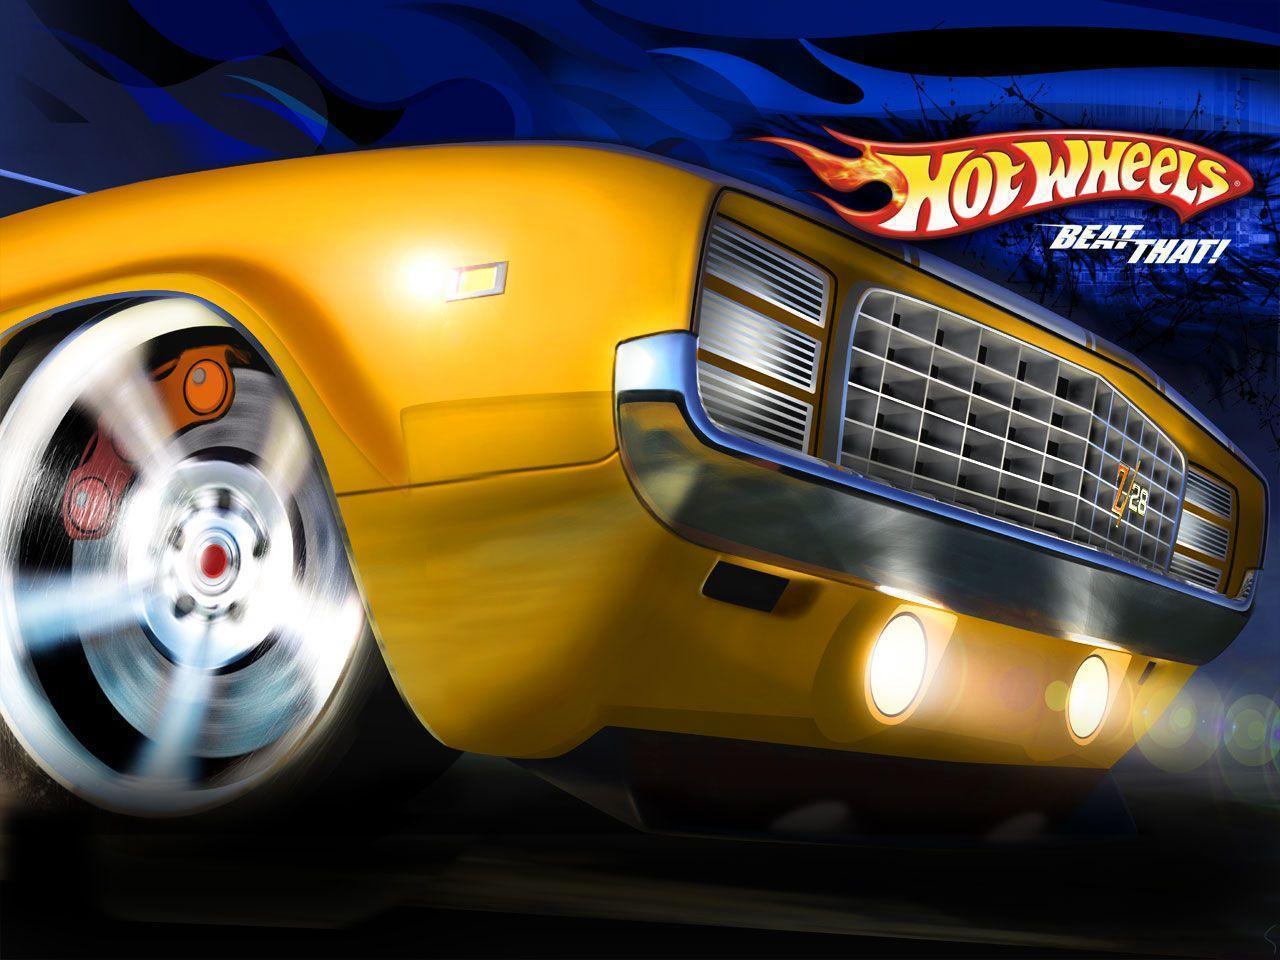 Hot Wheels image Hot wheels HD wallpapers and backgrounds photos.